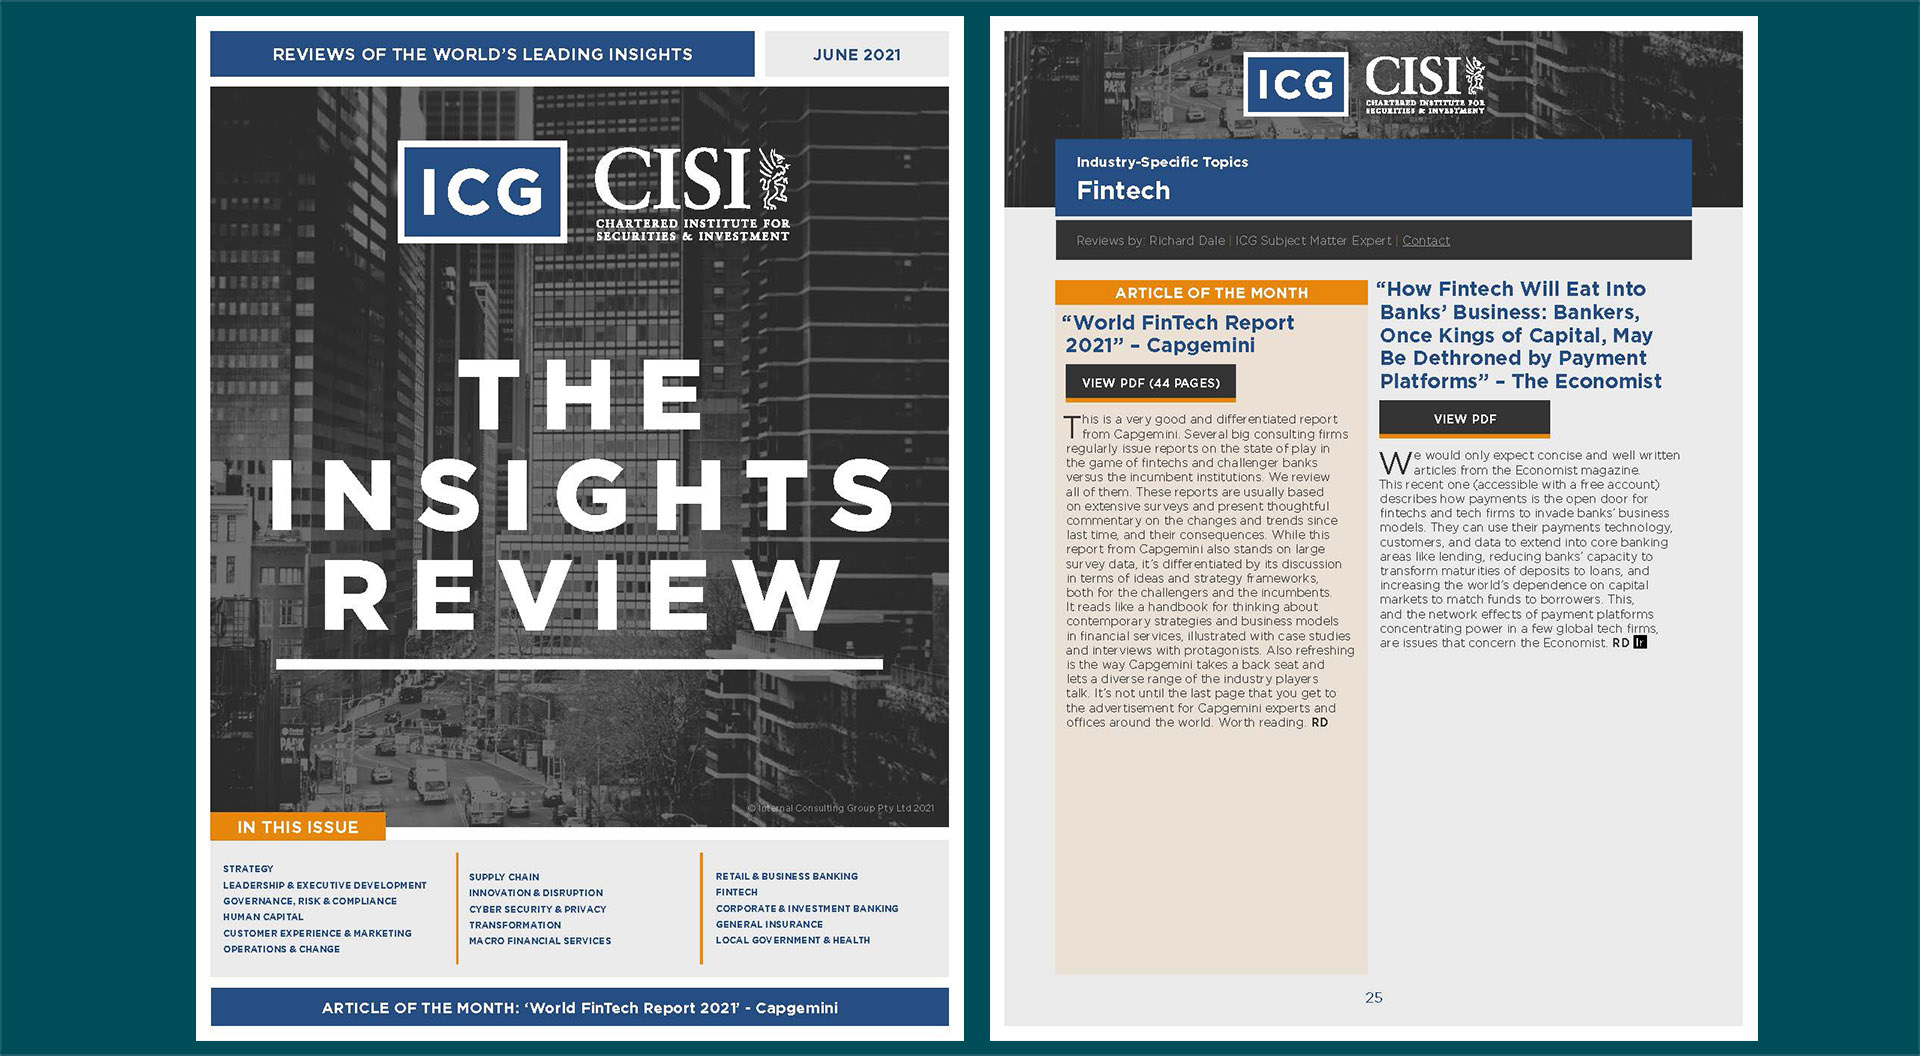 insights-review-by-icg-june-2021